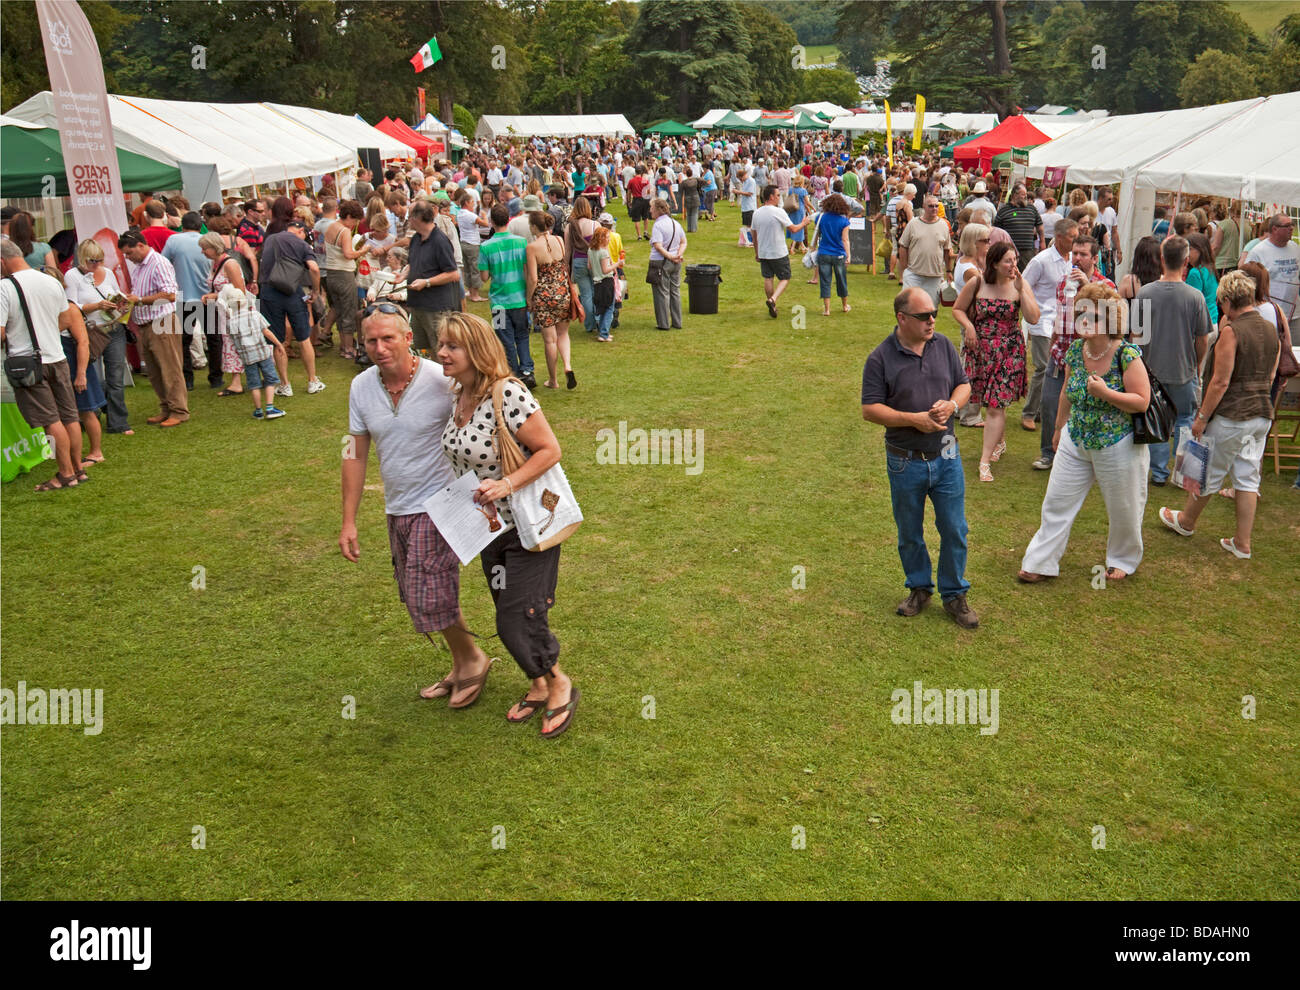 Crowds attending the West Dean Chilli Fiesta West Sussex England UK Stock Photo